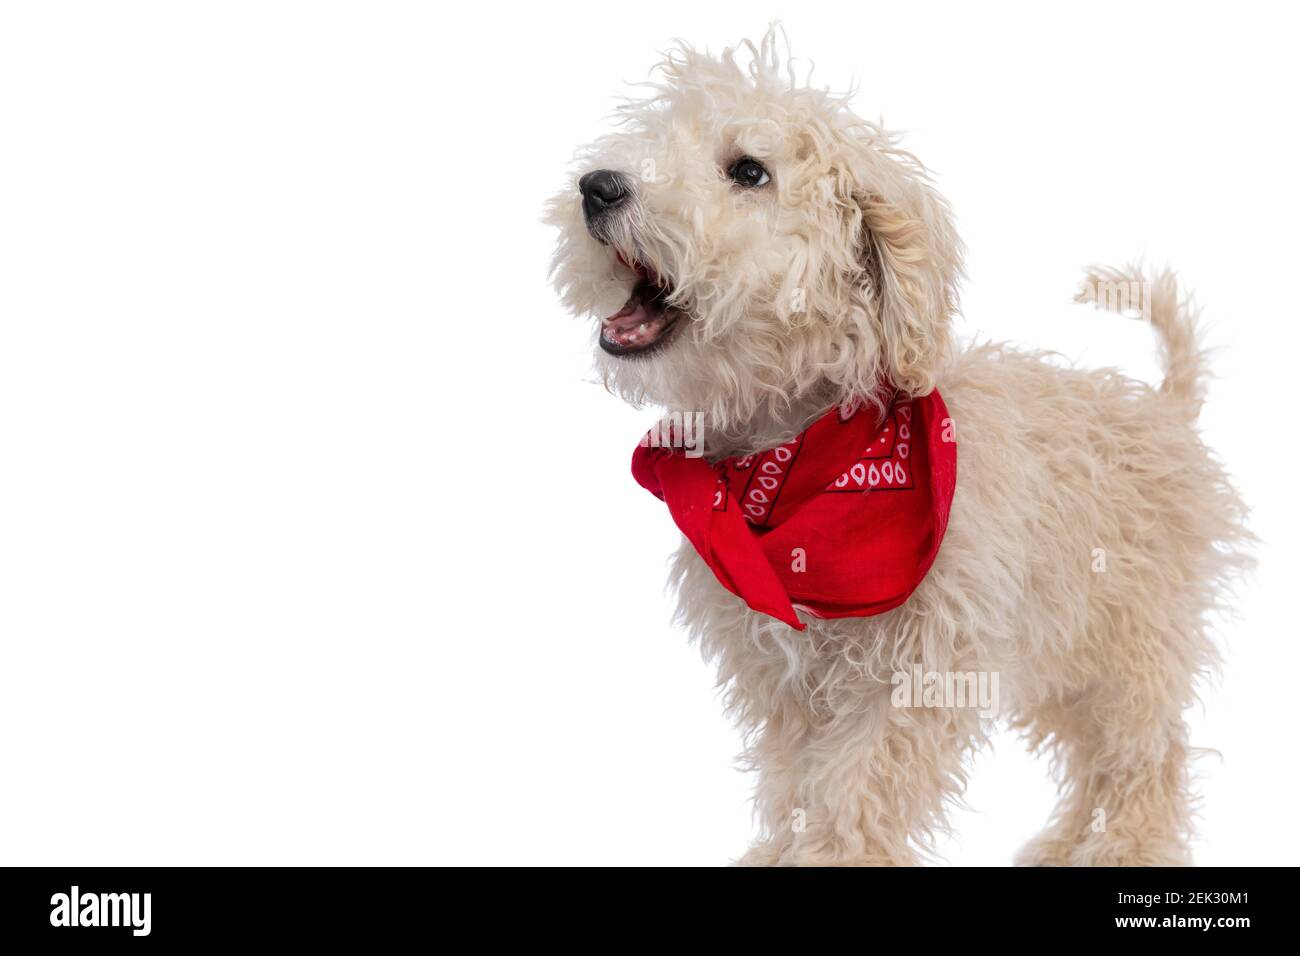 side view of a cute caniche dog barking and wearing a red bandana ...